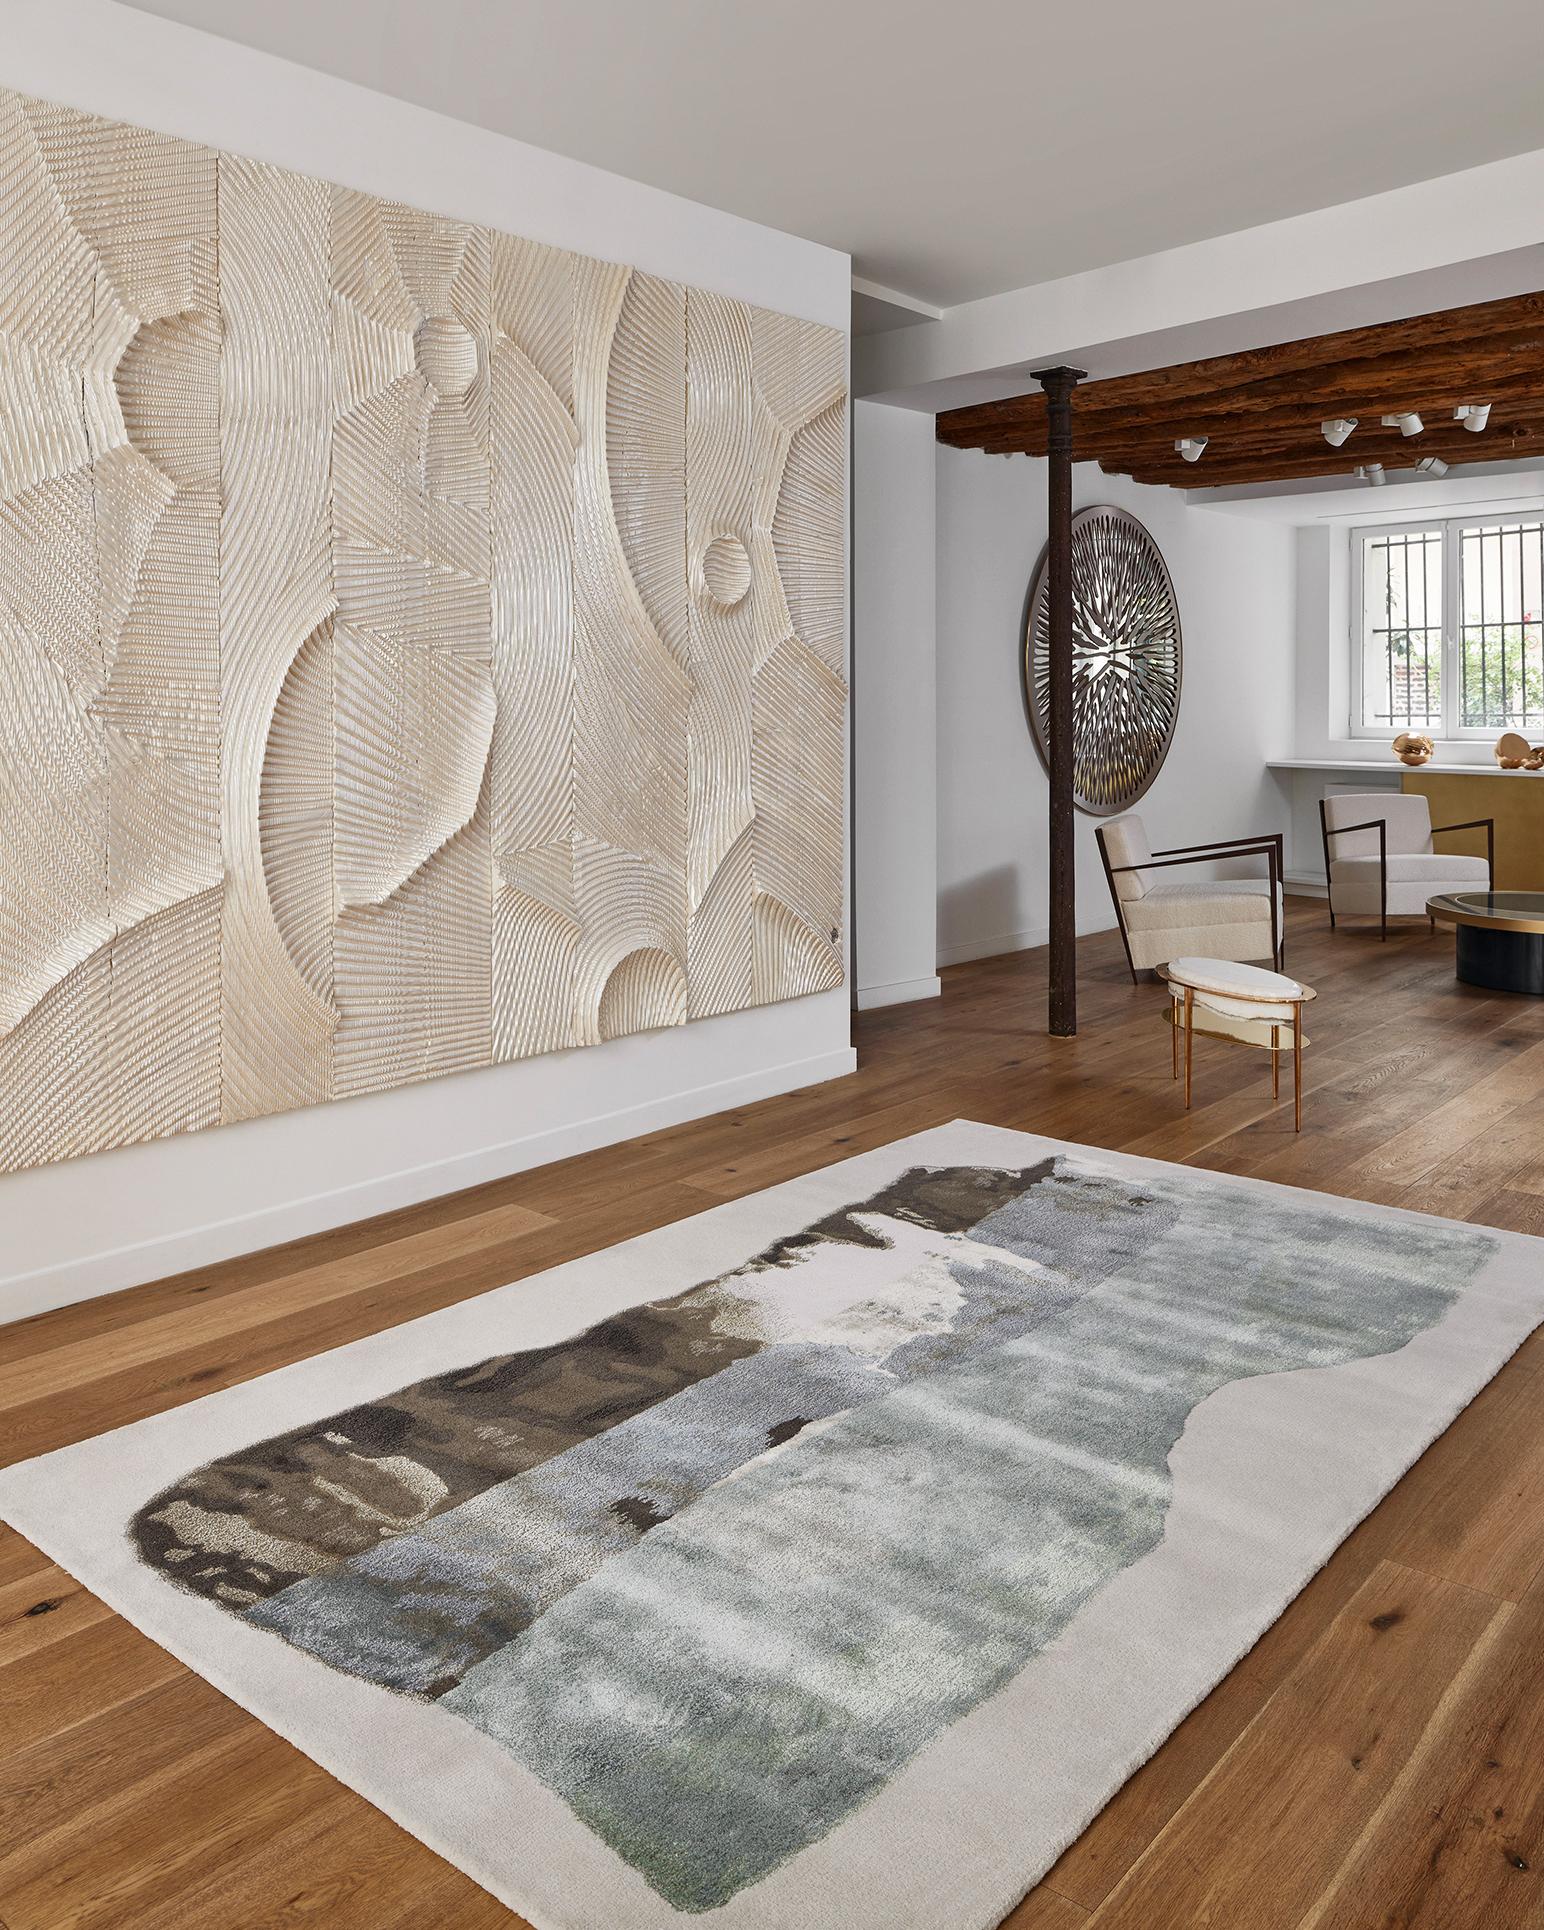 Littoral, Rug made by Ateliers Maison Pinton, from a Perrin&Perrin design. Wool, silk, cotton and bamboo. H 175 x L 285 cm / H 68,8 x W 112,2 in. Limited Edition of 6

For over 150 years, Pinton has been perpetuating the savoir-faire of the Royal